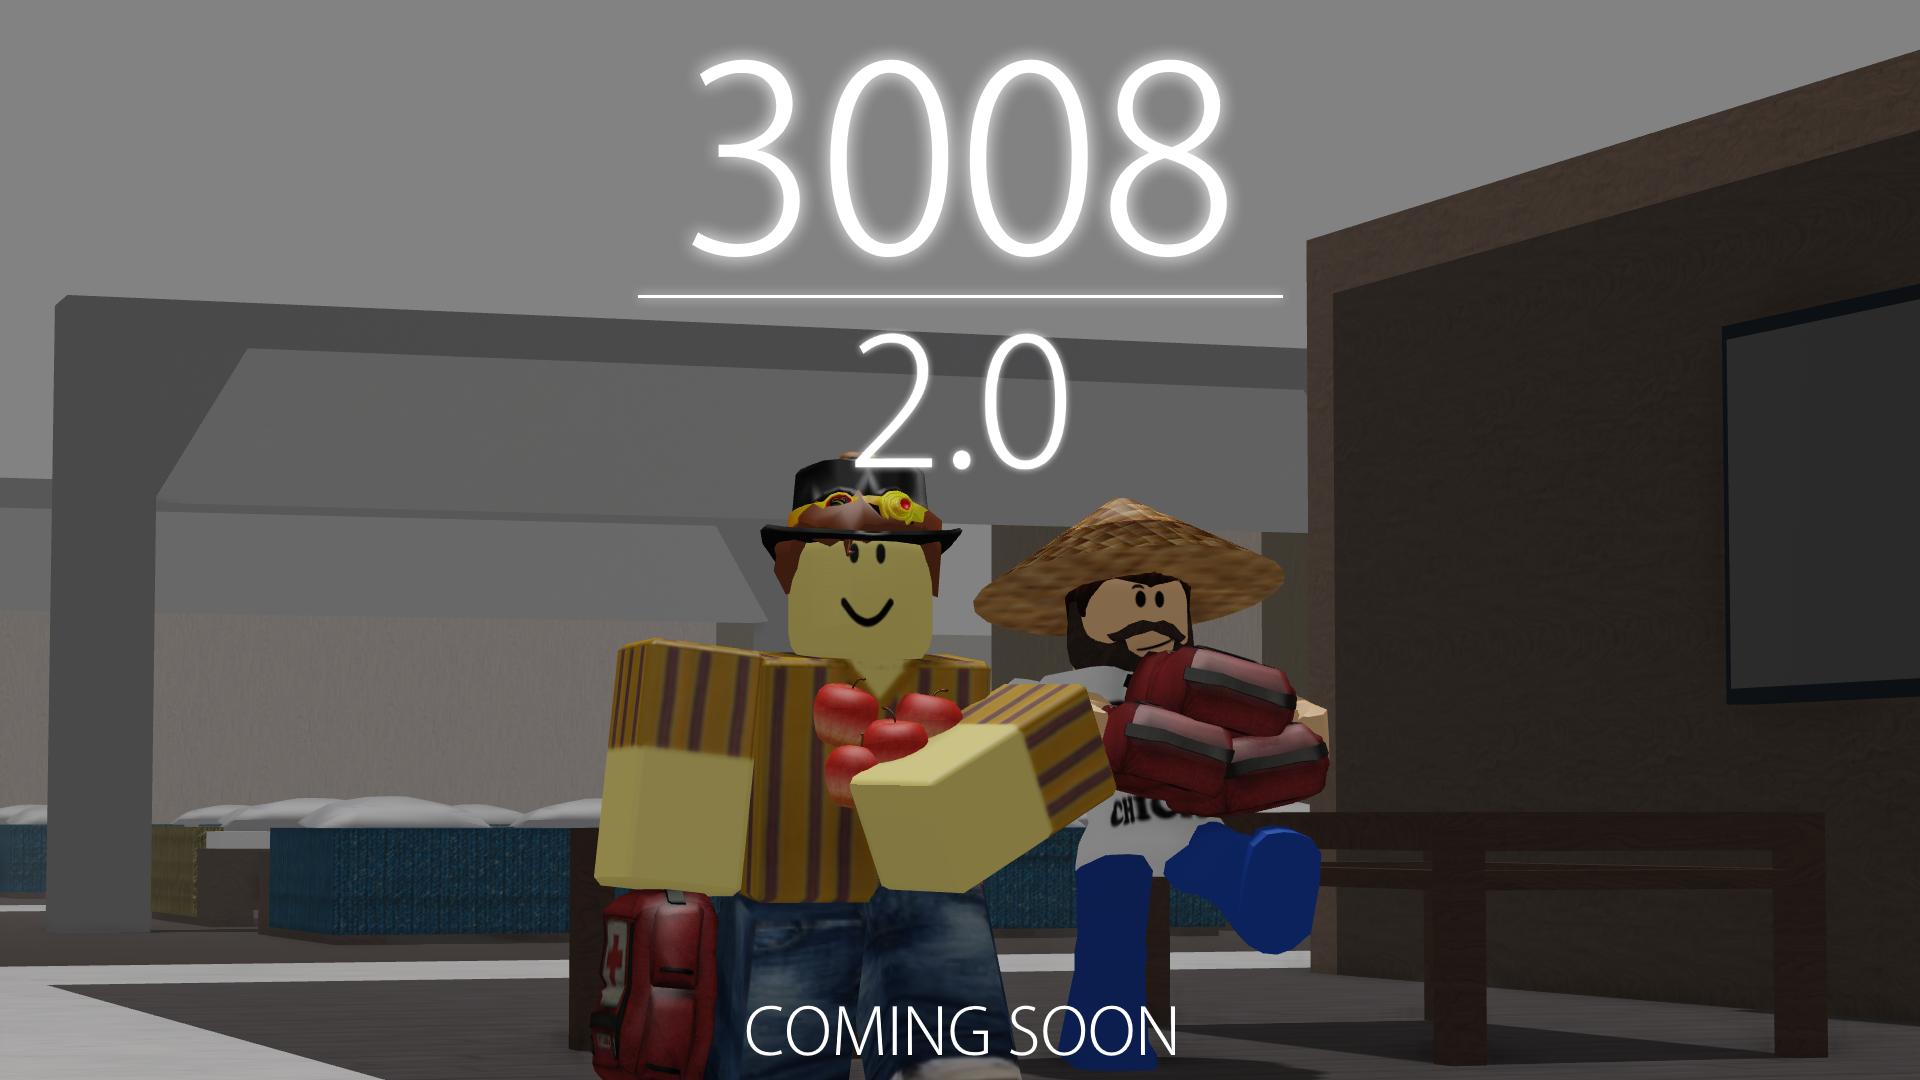 A normal day in scp-3008 #fyp #roblox #scp #scp3008 #scp3008roblox #ed, excuse me the store is now closed